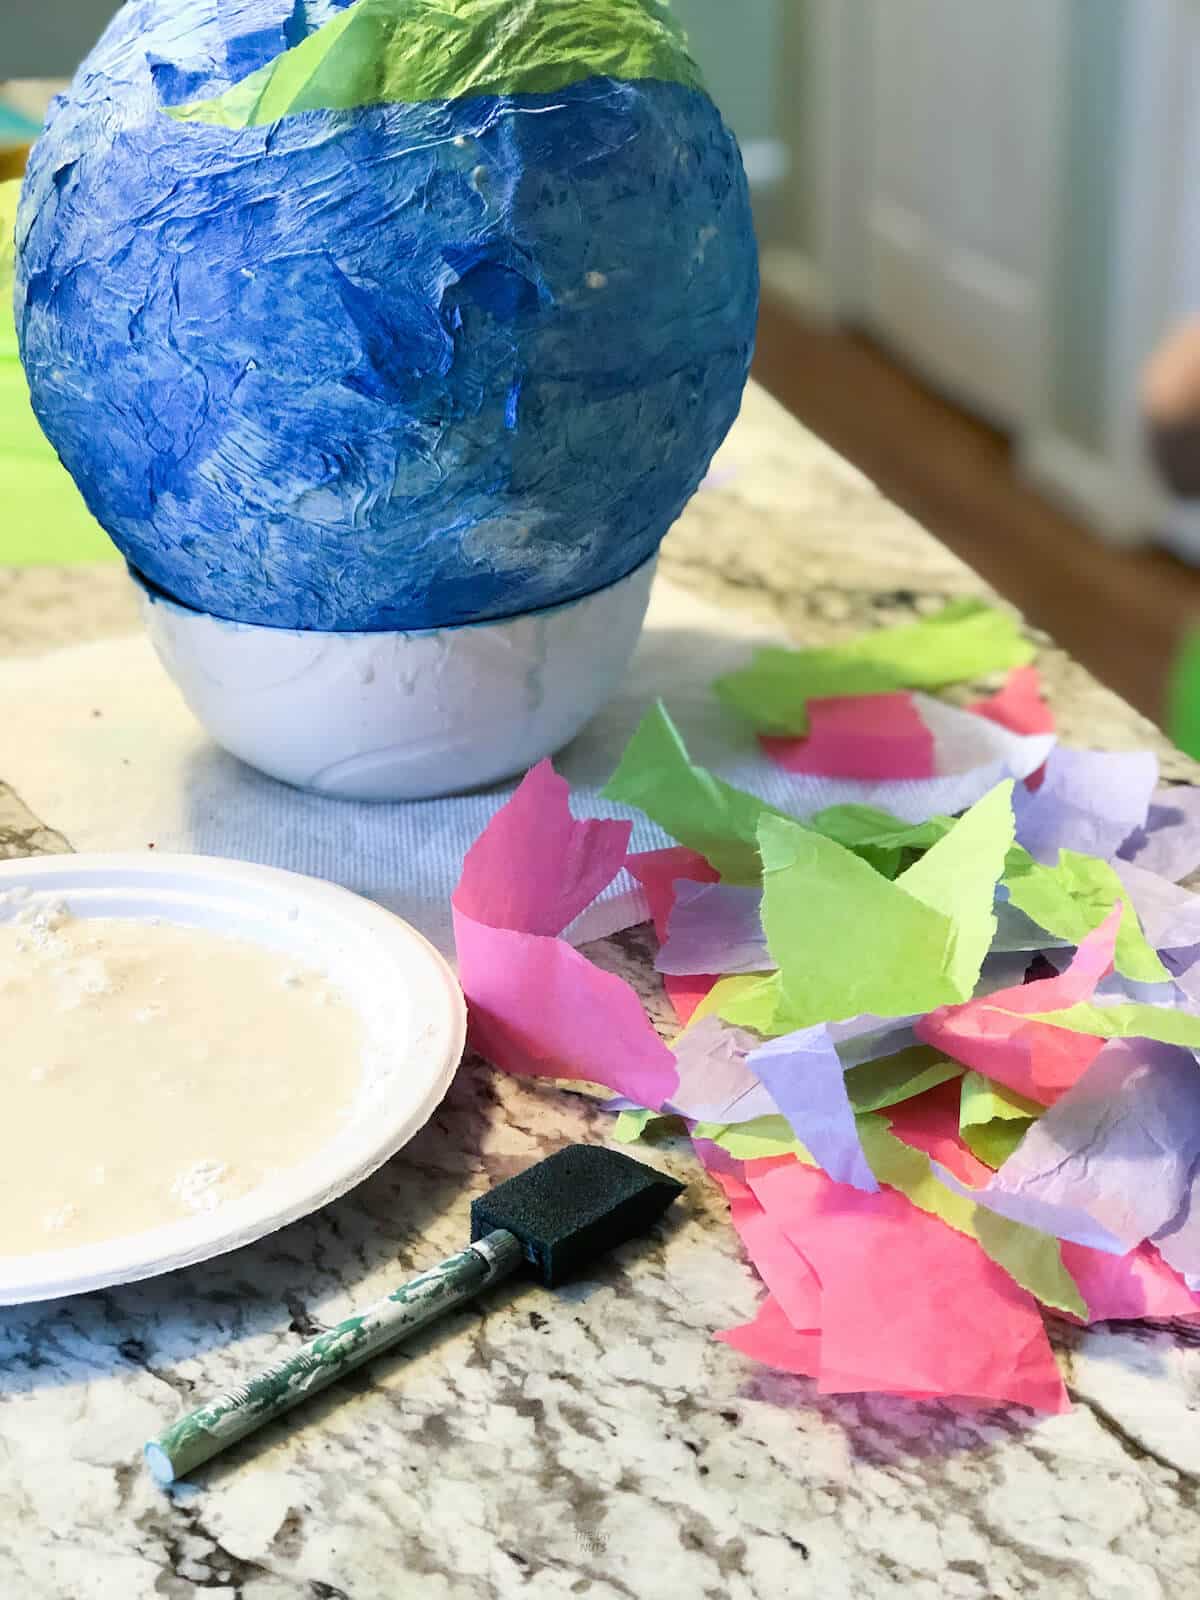 blue homemade piñata in bowl with plate of paste and loose tissue paper on counter.